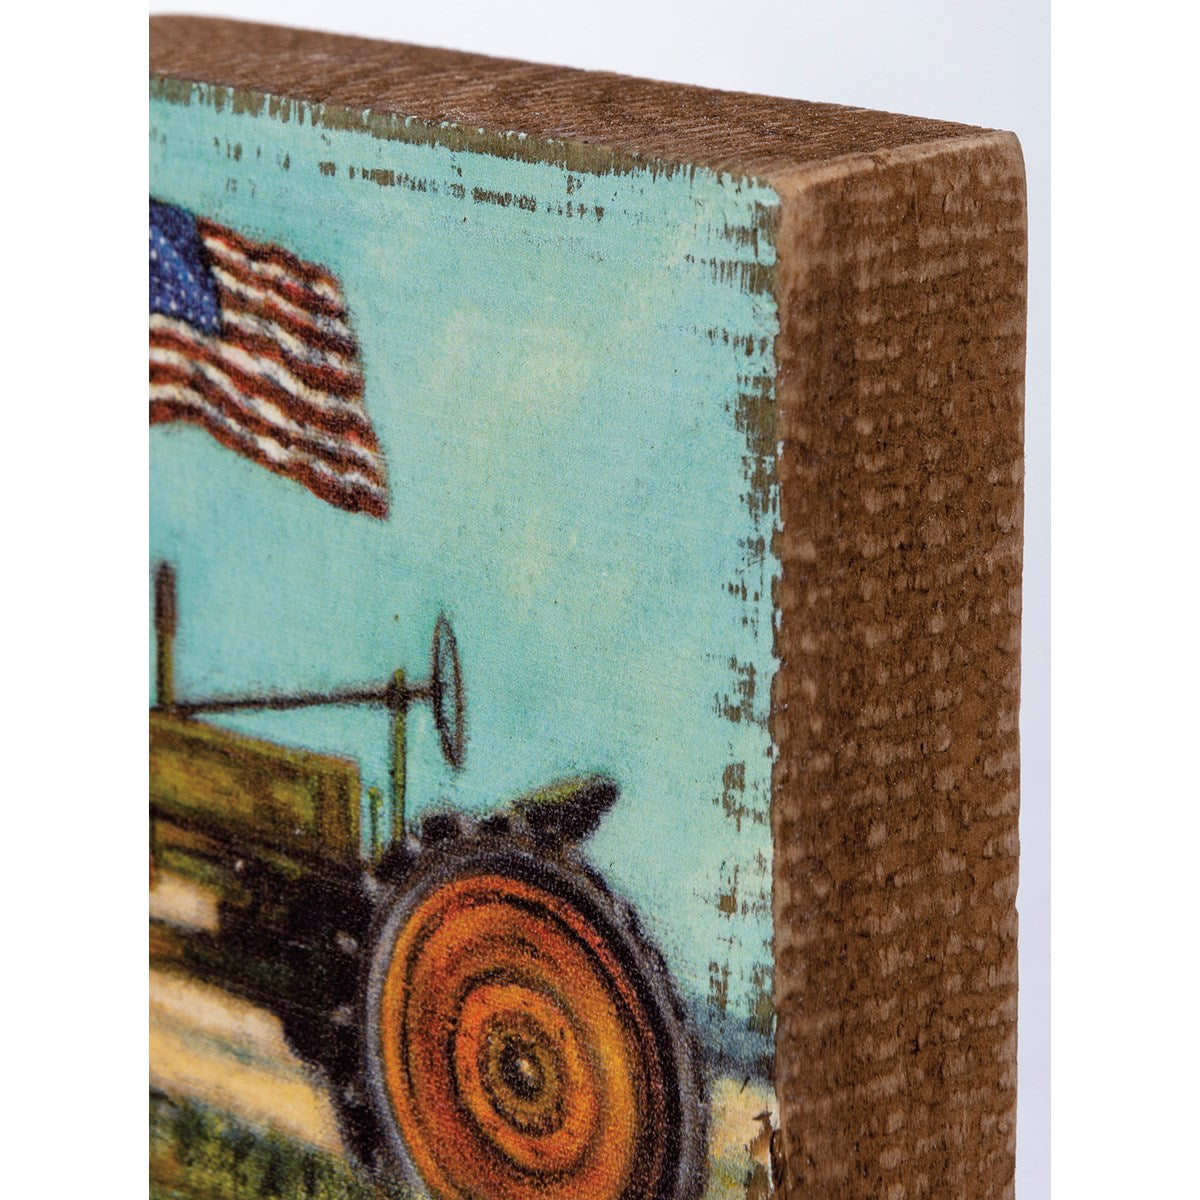 Tractor with Flag Block